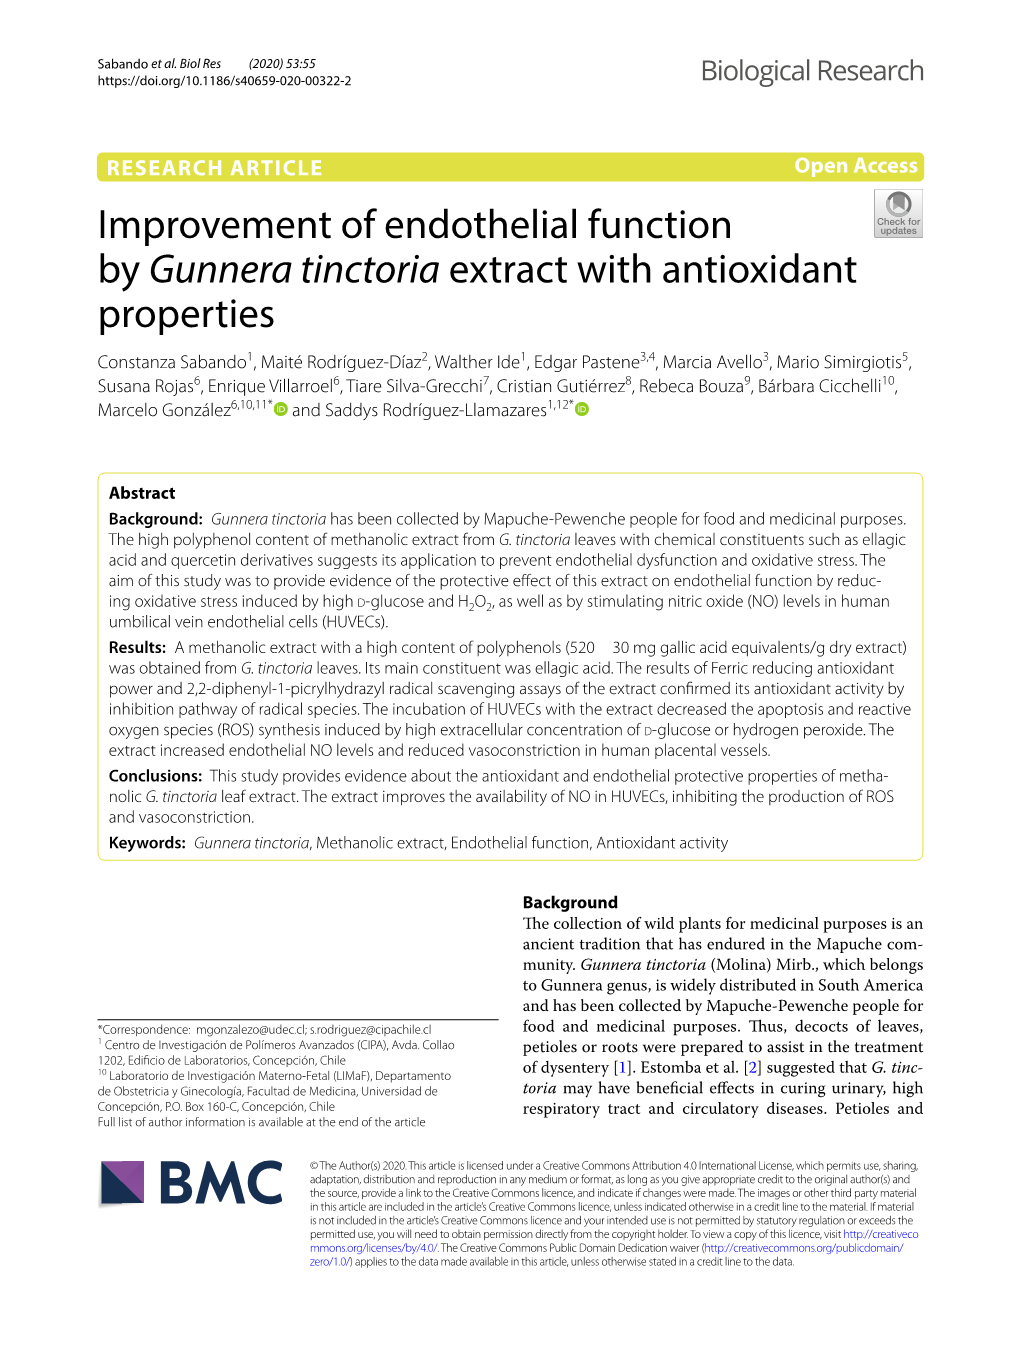 Improvement of Endothelial Function by Gunnera Tinctoria Extract With